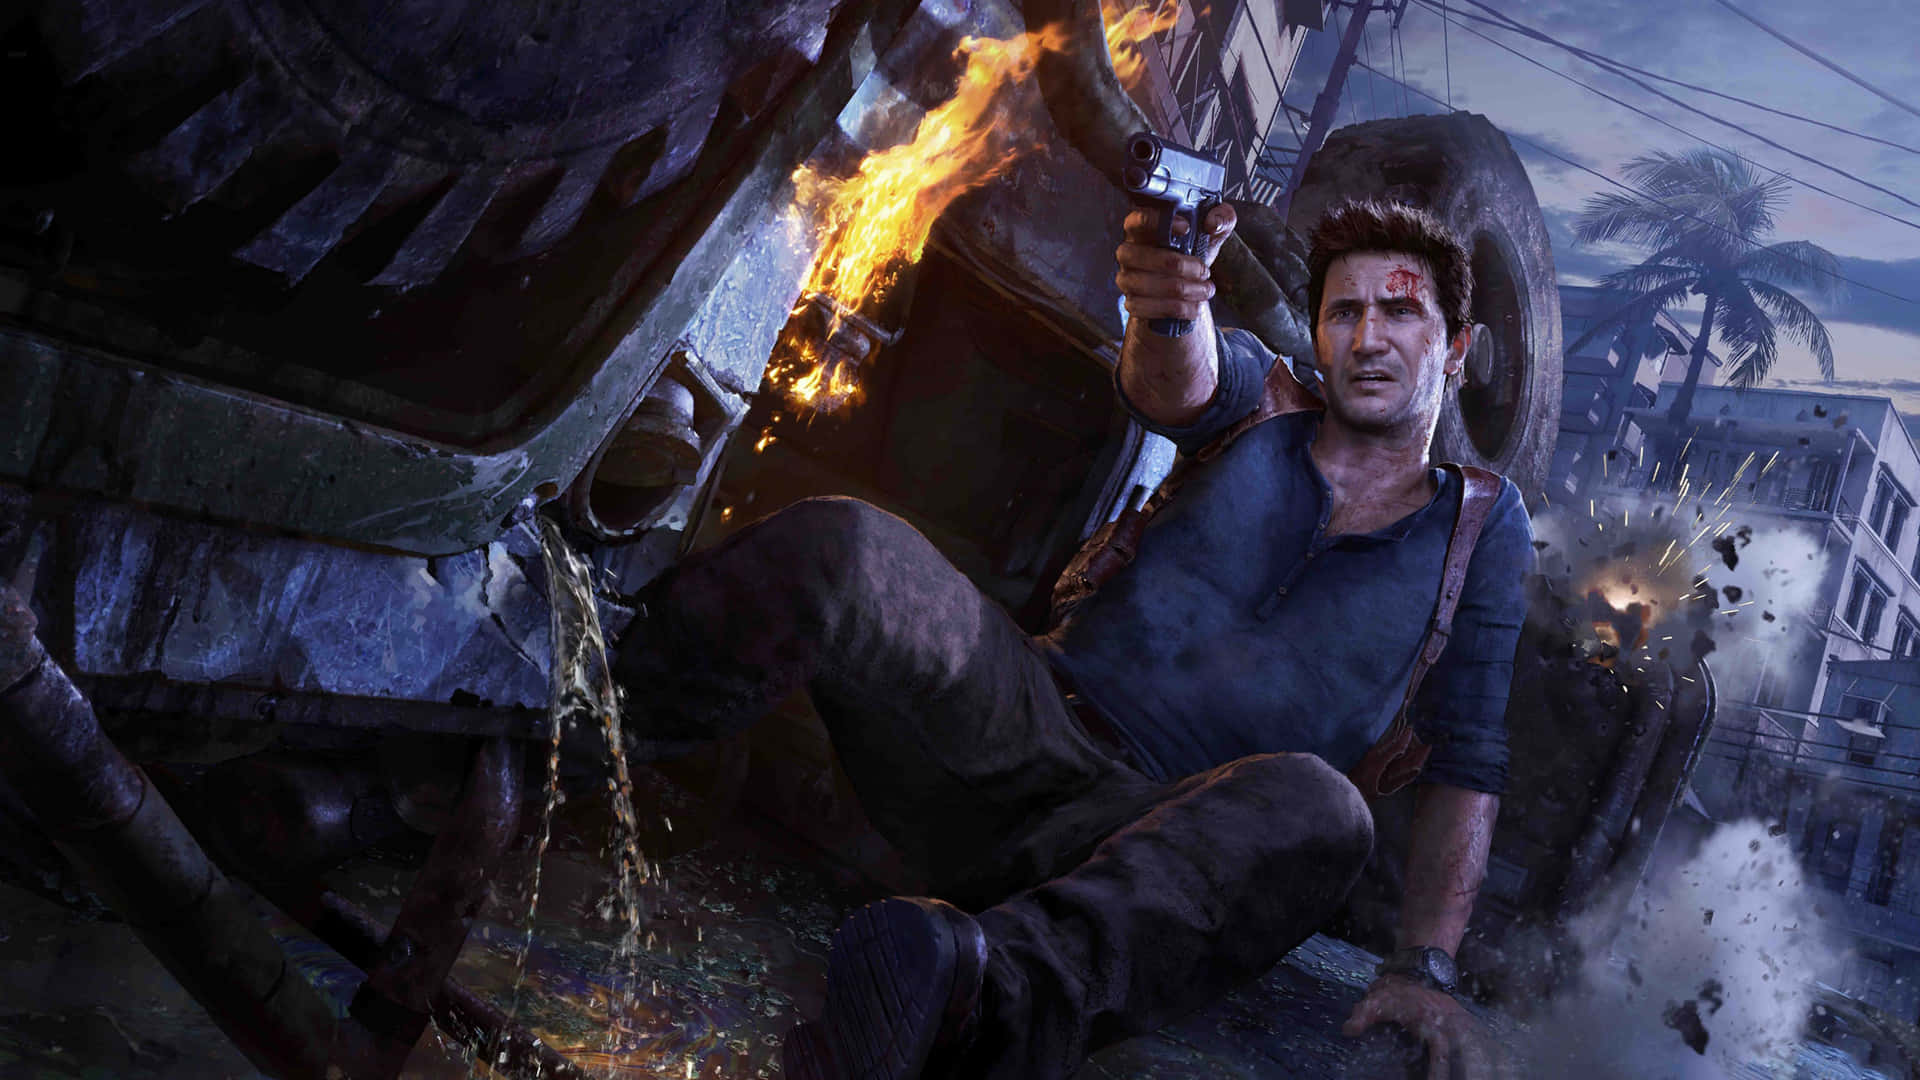 Uncharted4 - Pc - Pc - Pc - Pc - Pc Wallpaper